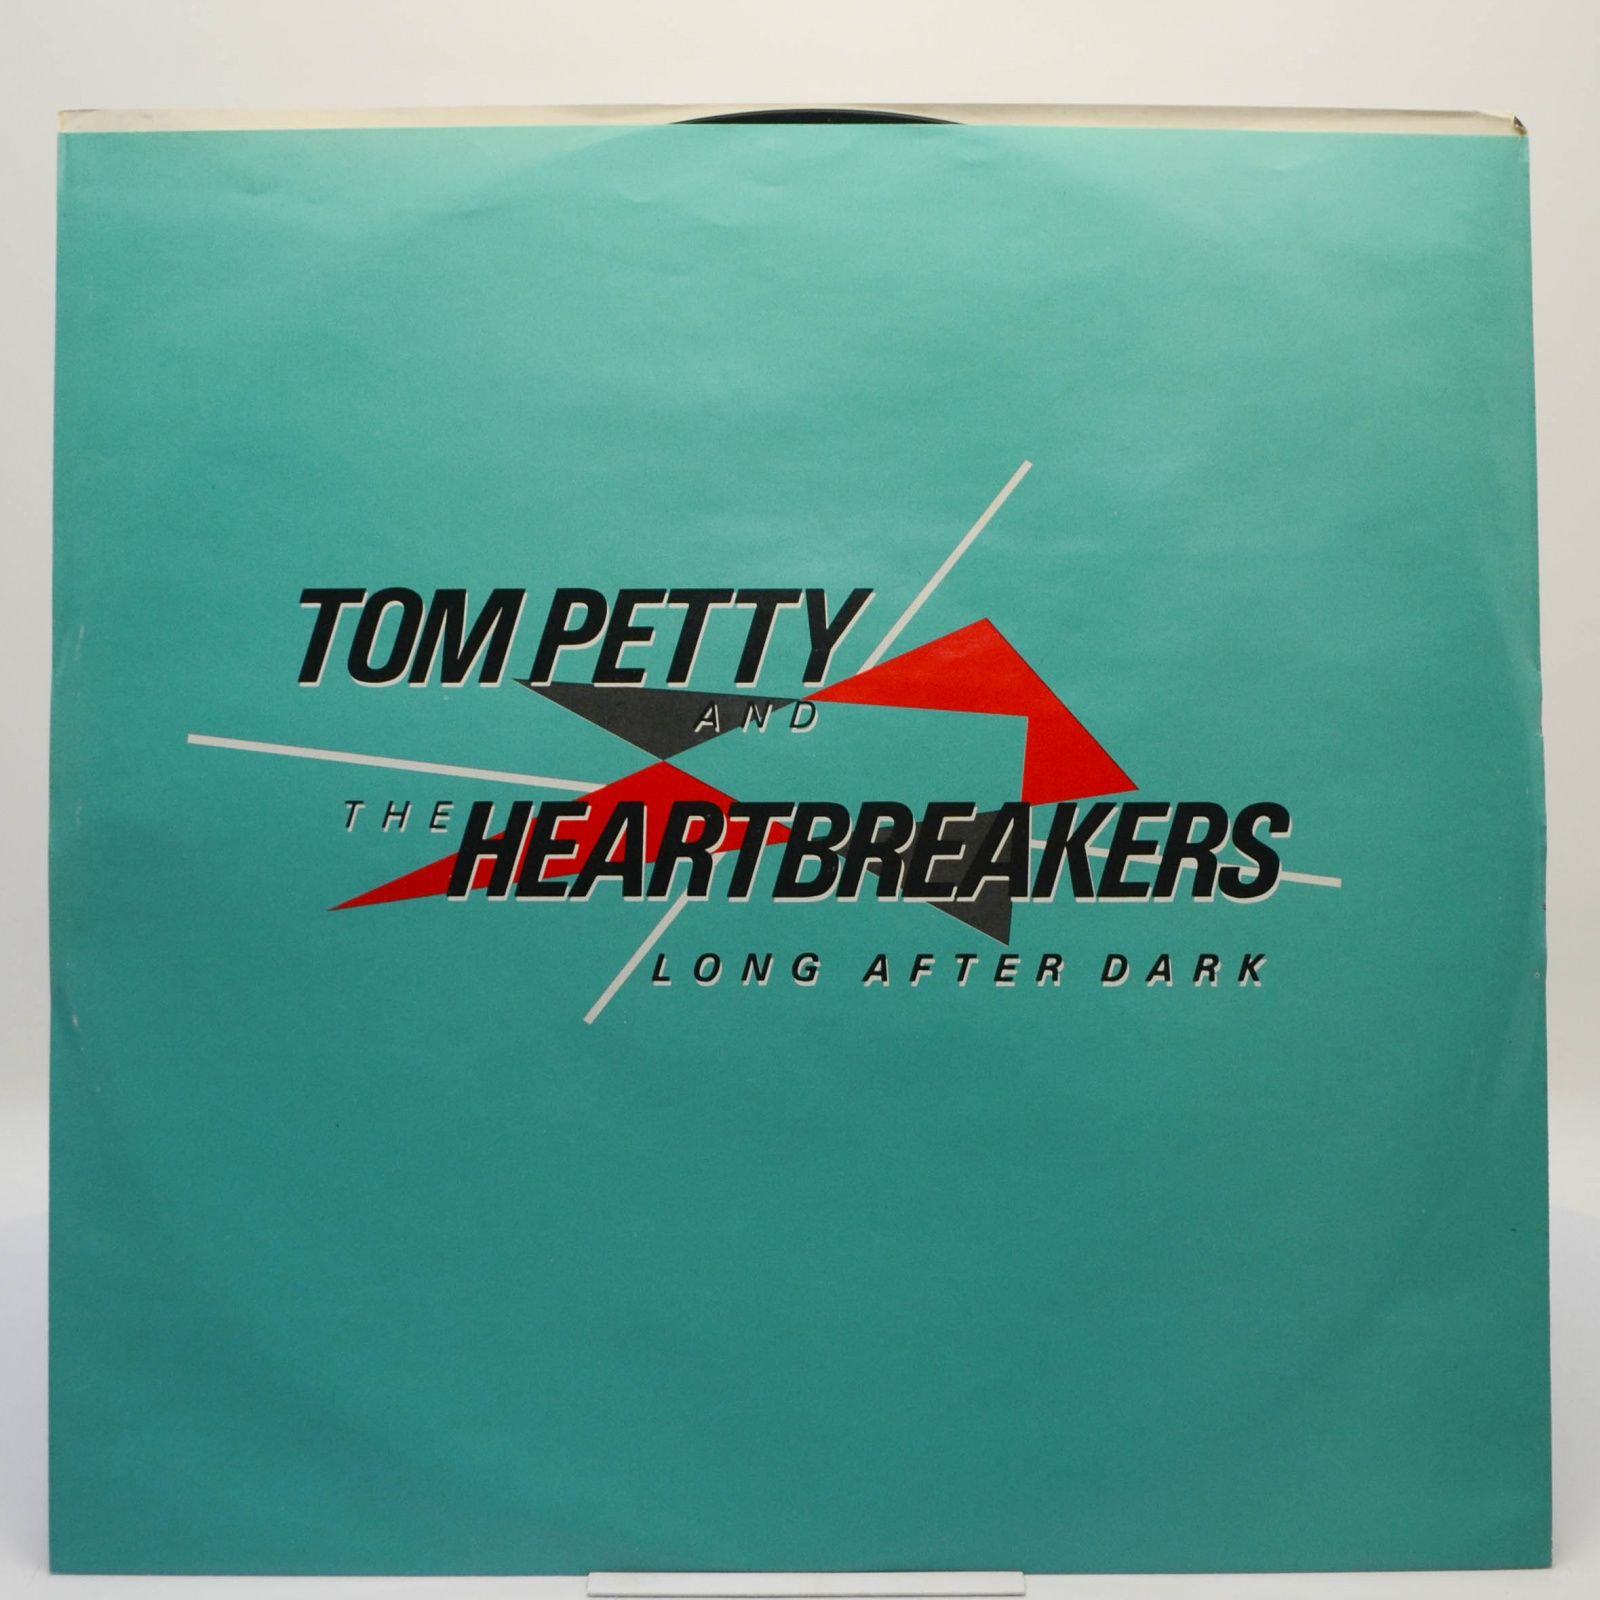 Tom Petty And The Heartbreakers — Long After Dark, 1982